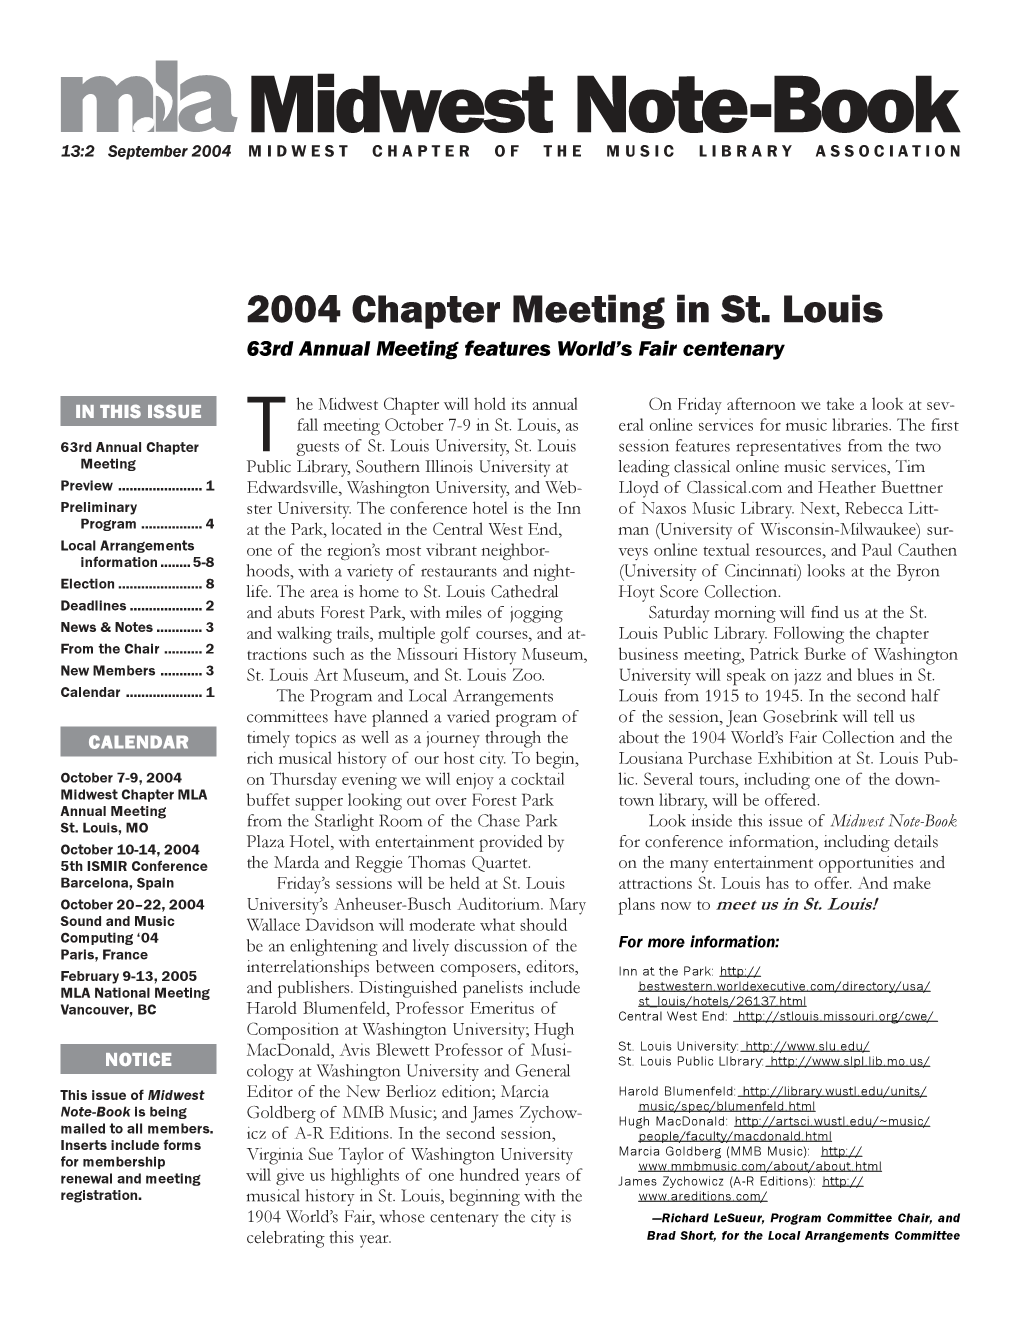 Midwest Note-Book 13:2 September 2004 MIDWEST CHAPTER of the MUSIC LIBRARY ASSOCIATION